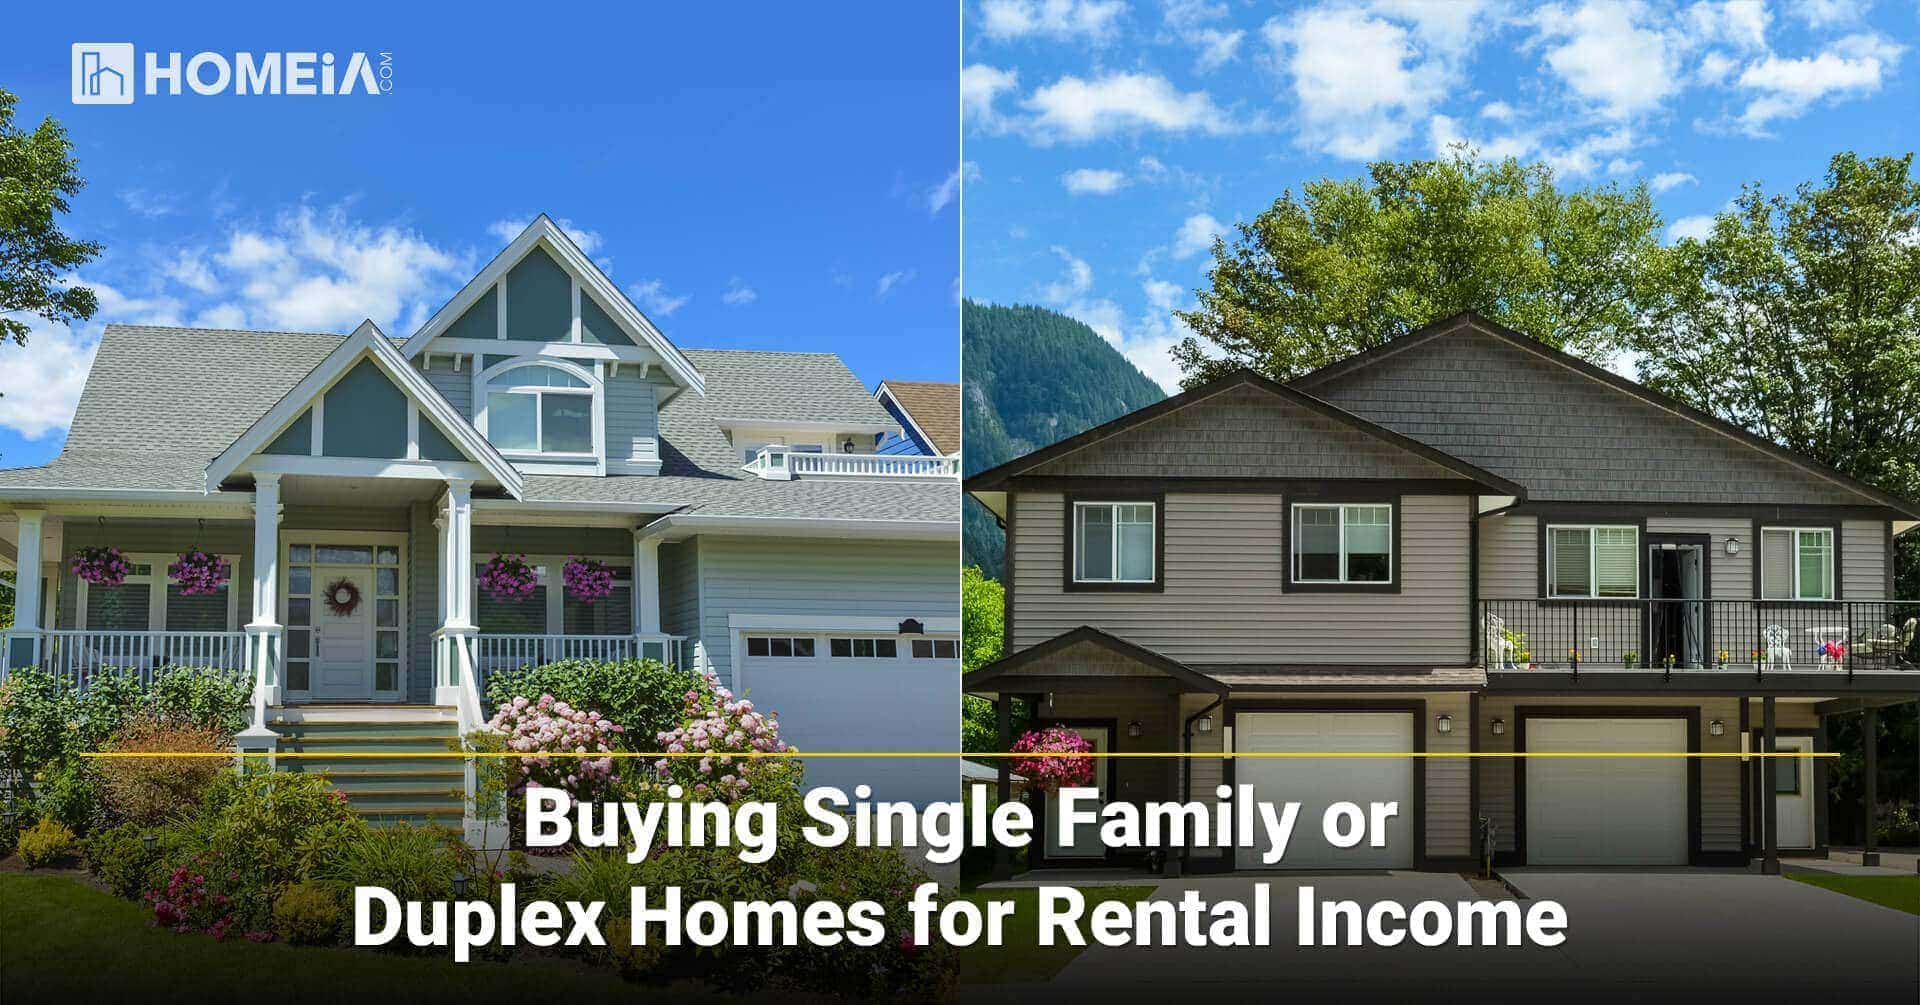 Buying Single Family or Duplex Homes for Rental Income